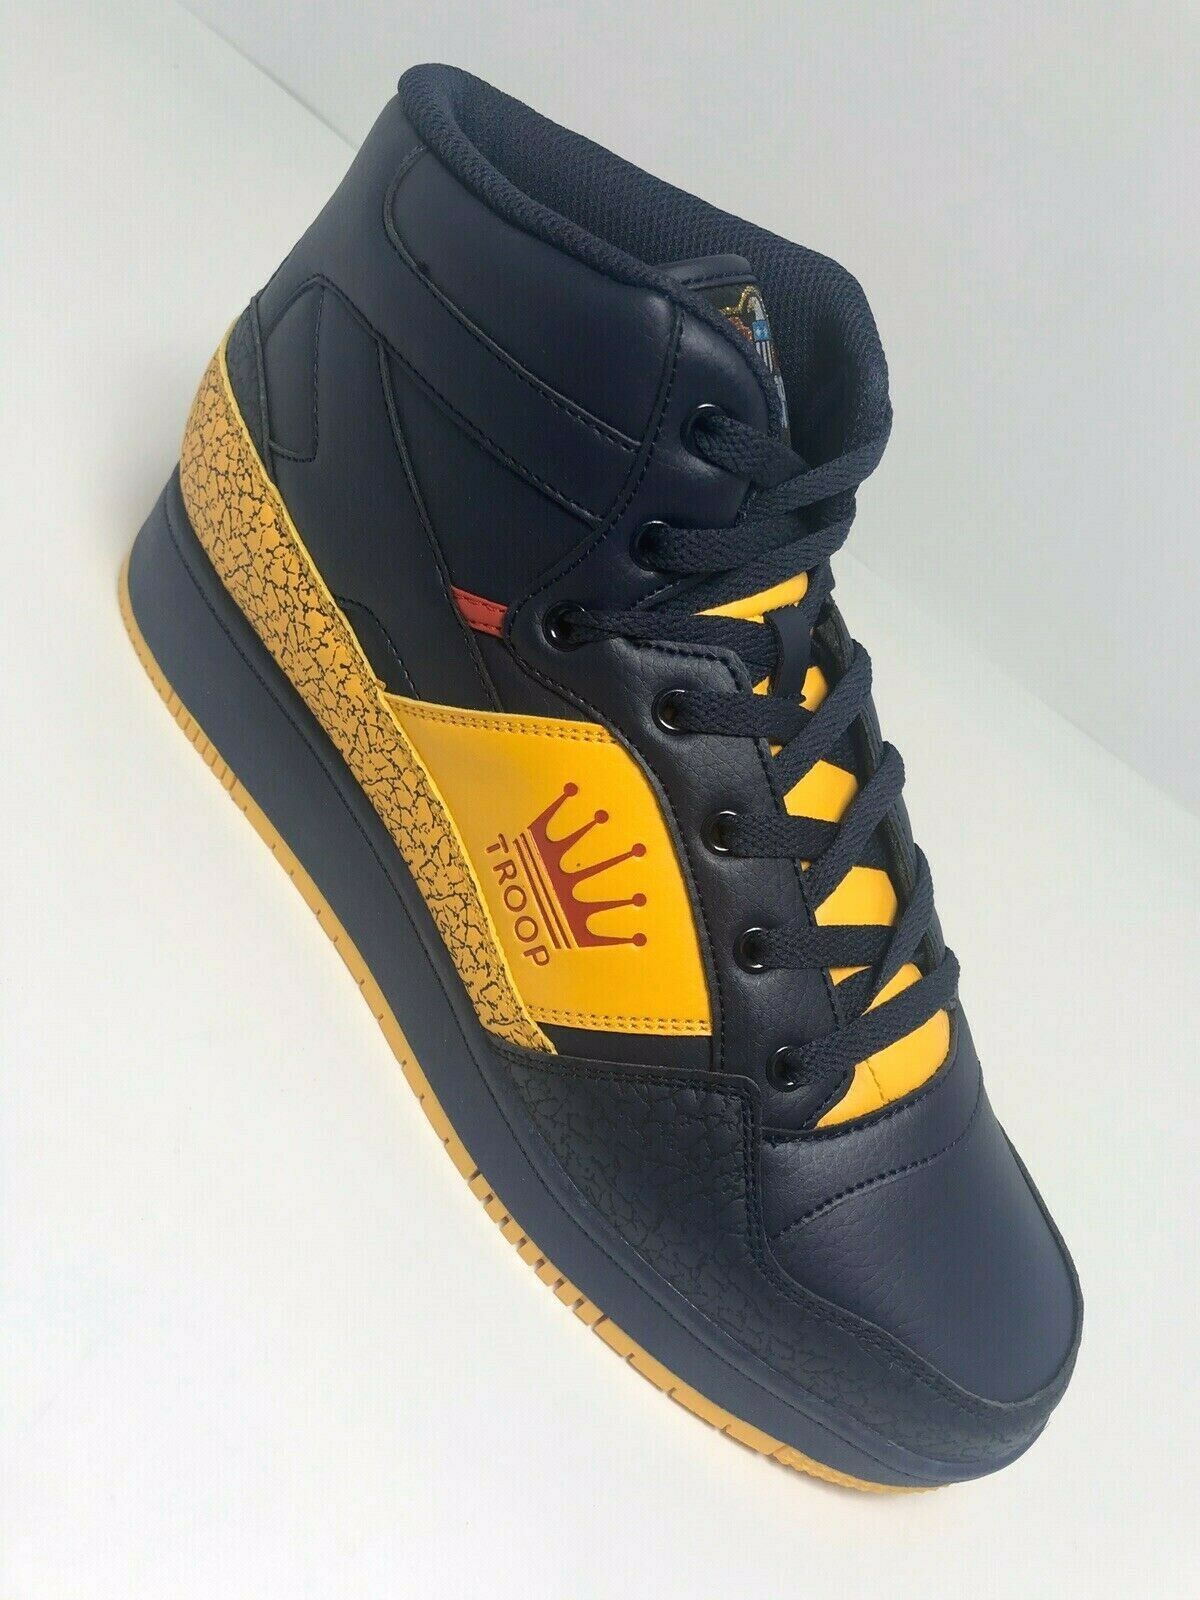 Primary image for Men's Troop Destroyer Navy | Mustard Yellow High-Top Sneakers NWT